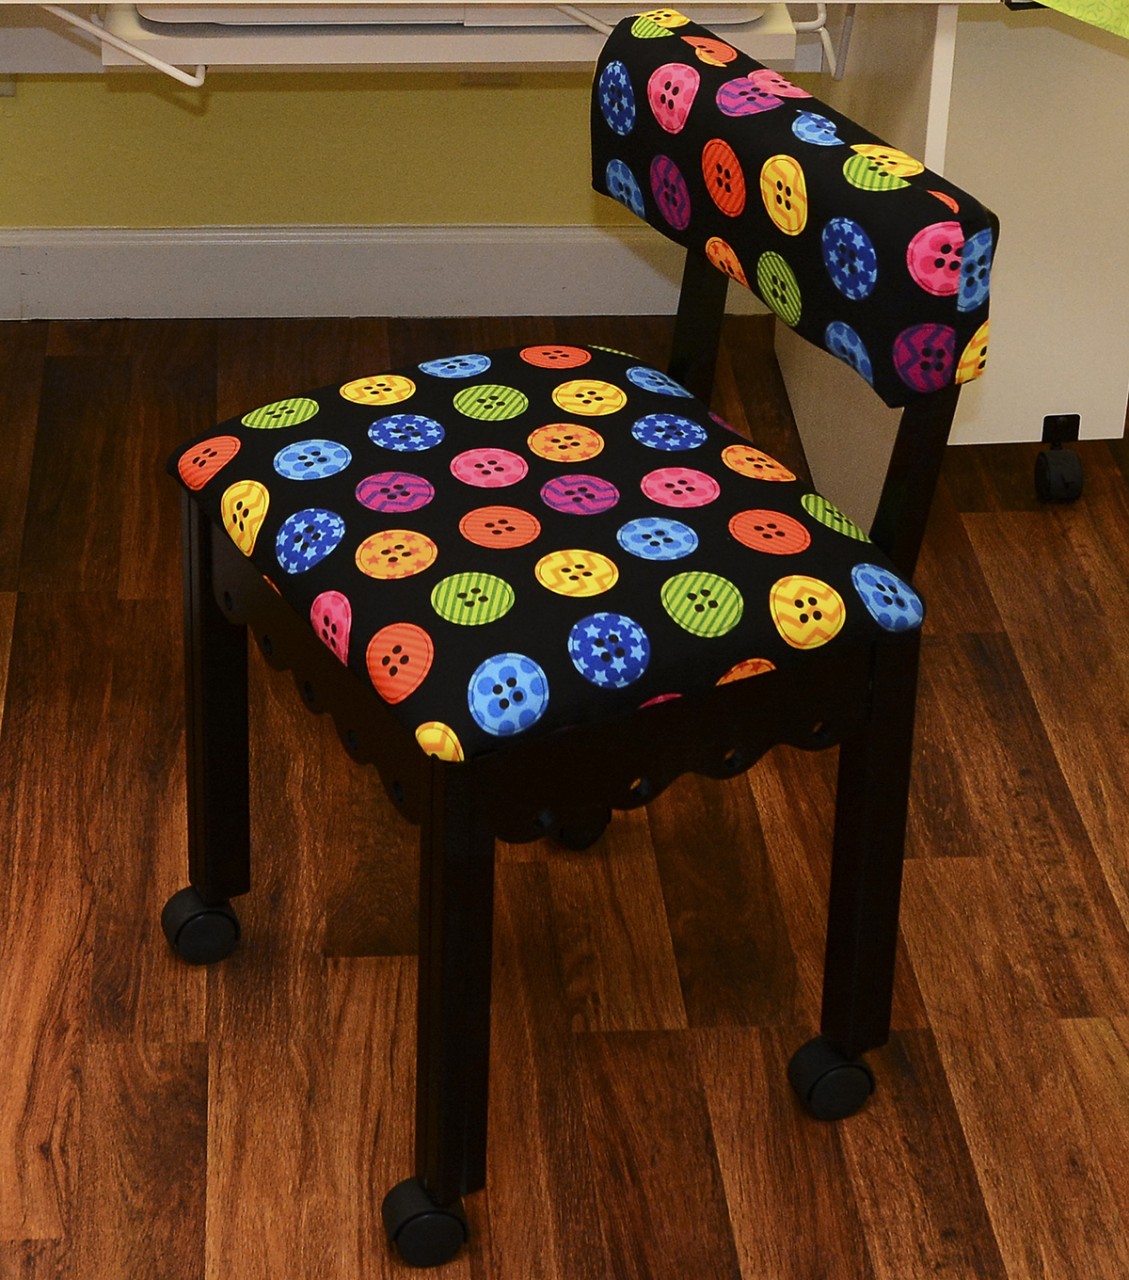 Arrow Green Sewing Chair with Scalloped Base Sewing Notions on Black 